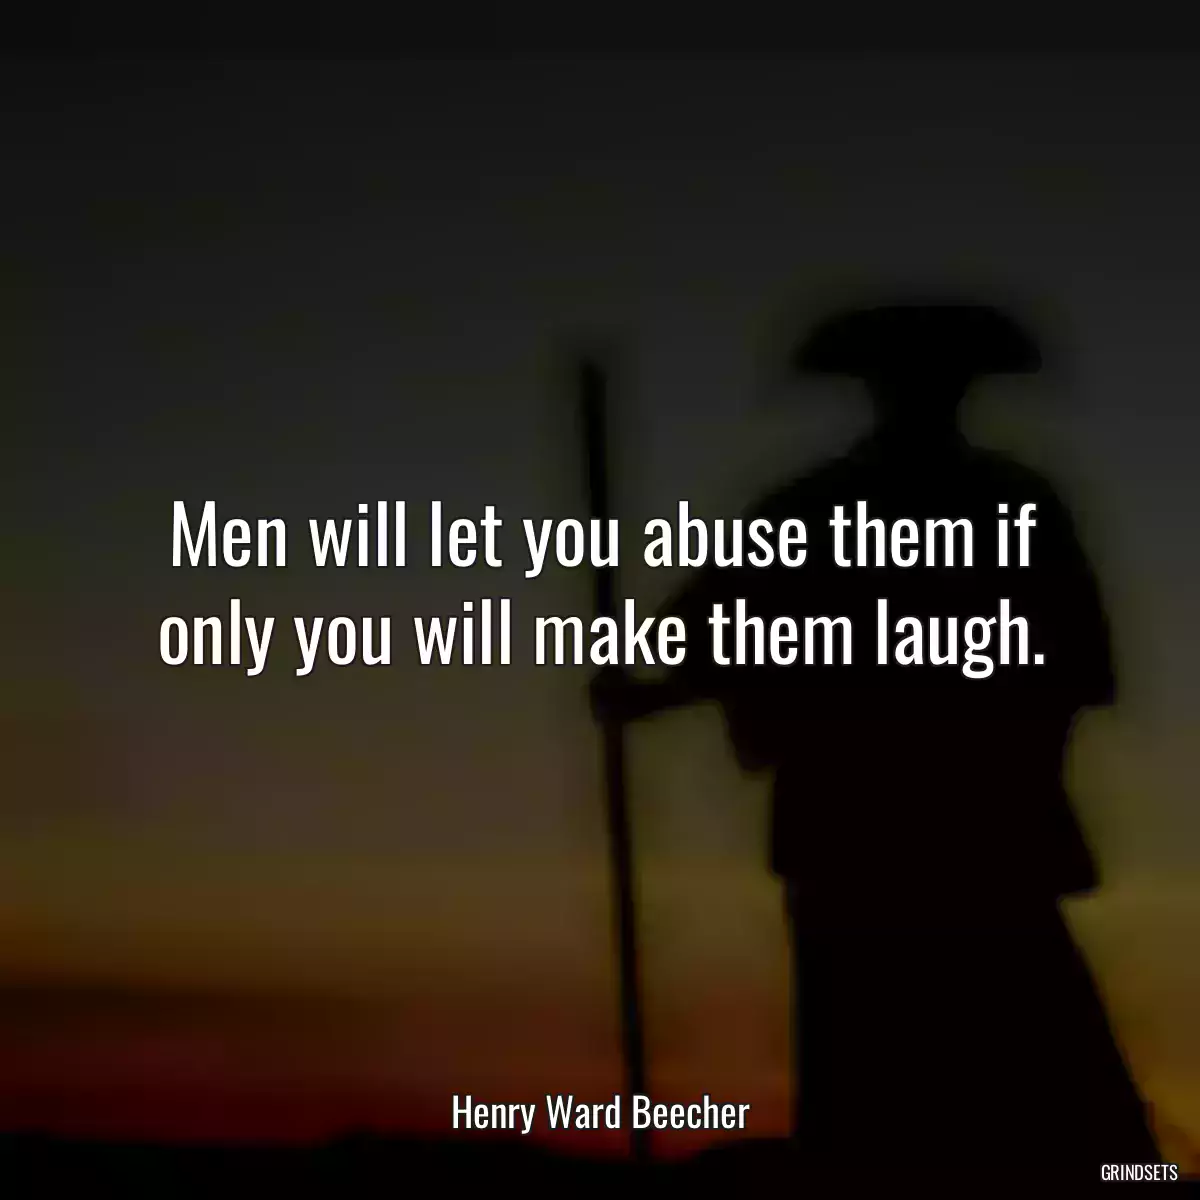 Men will let you abuse them if only you will make them laugh.